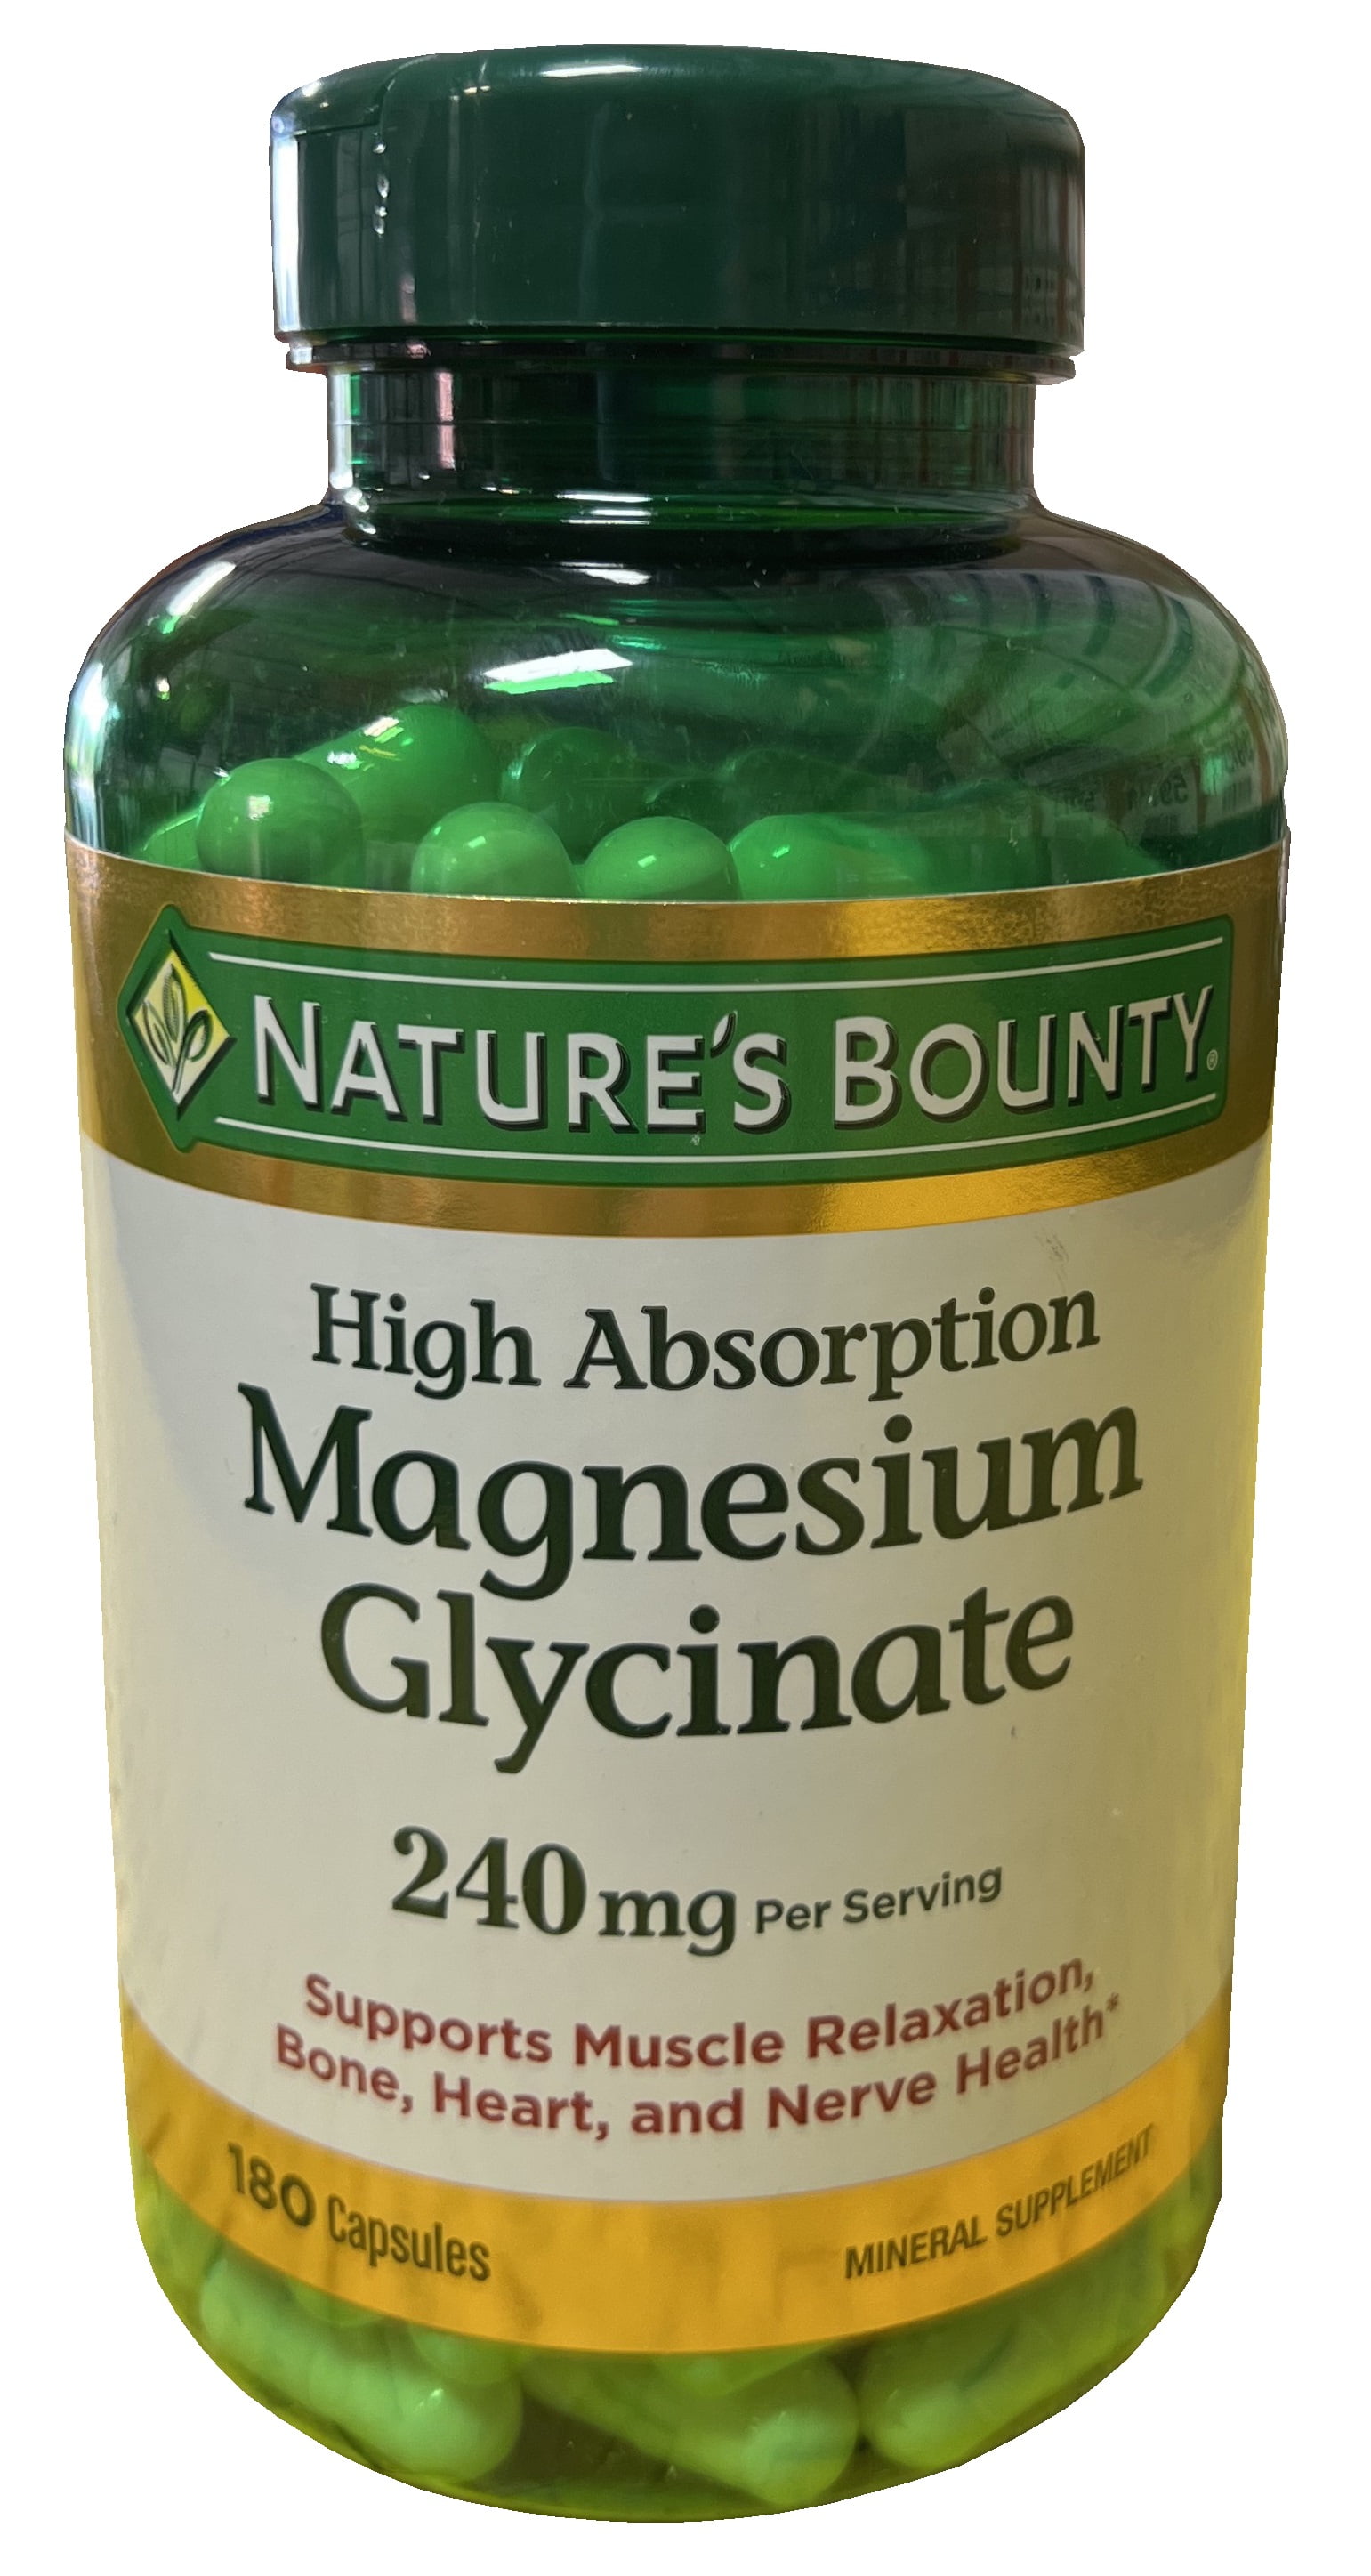 Egypte Onhandig Indringing Nature's Bounty High Absorption Magnesium Glycinate, 240mg (180 Count) -  Walmart.com